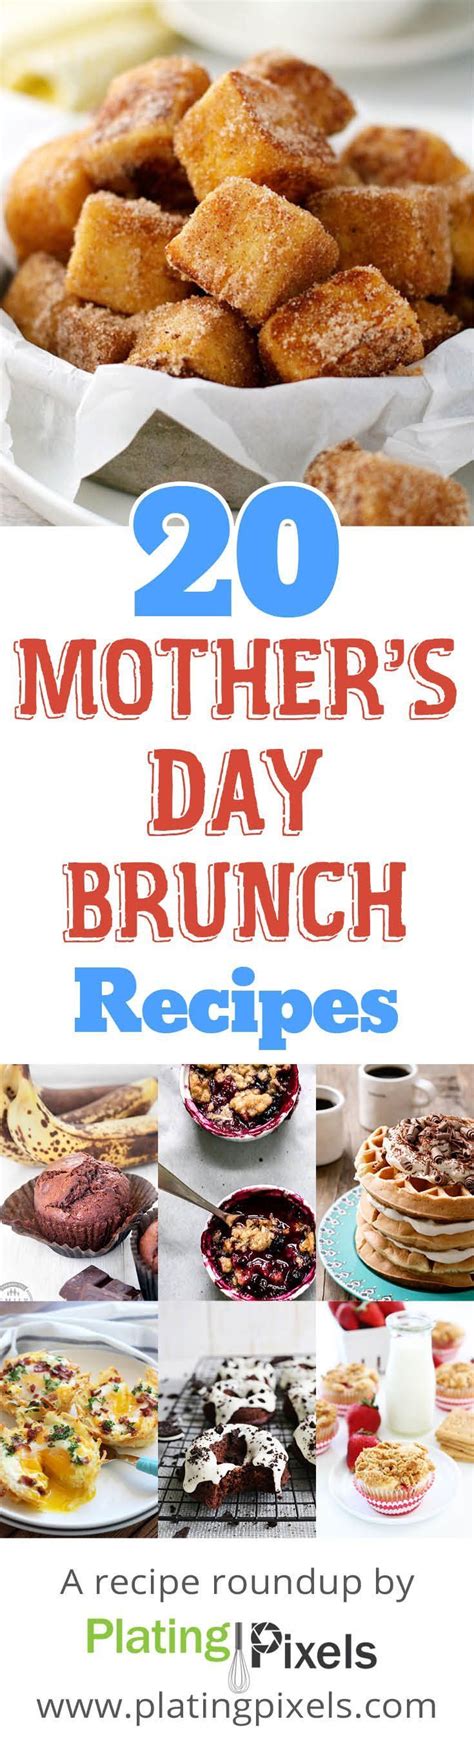 20 Mothers Day Brunch Recipes Roundup By Plating Pixels Muffins